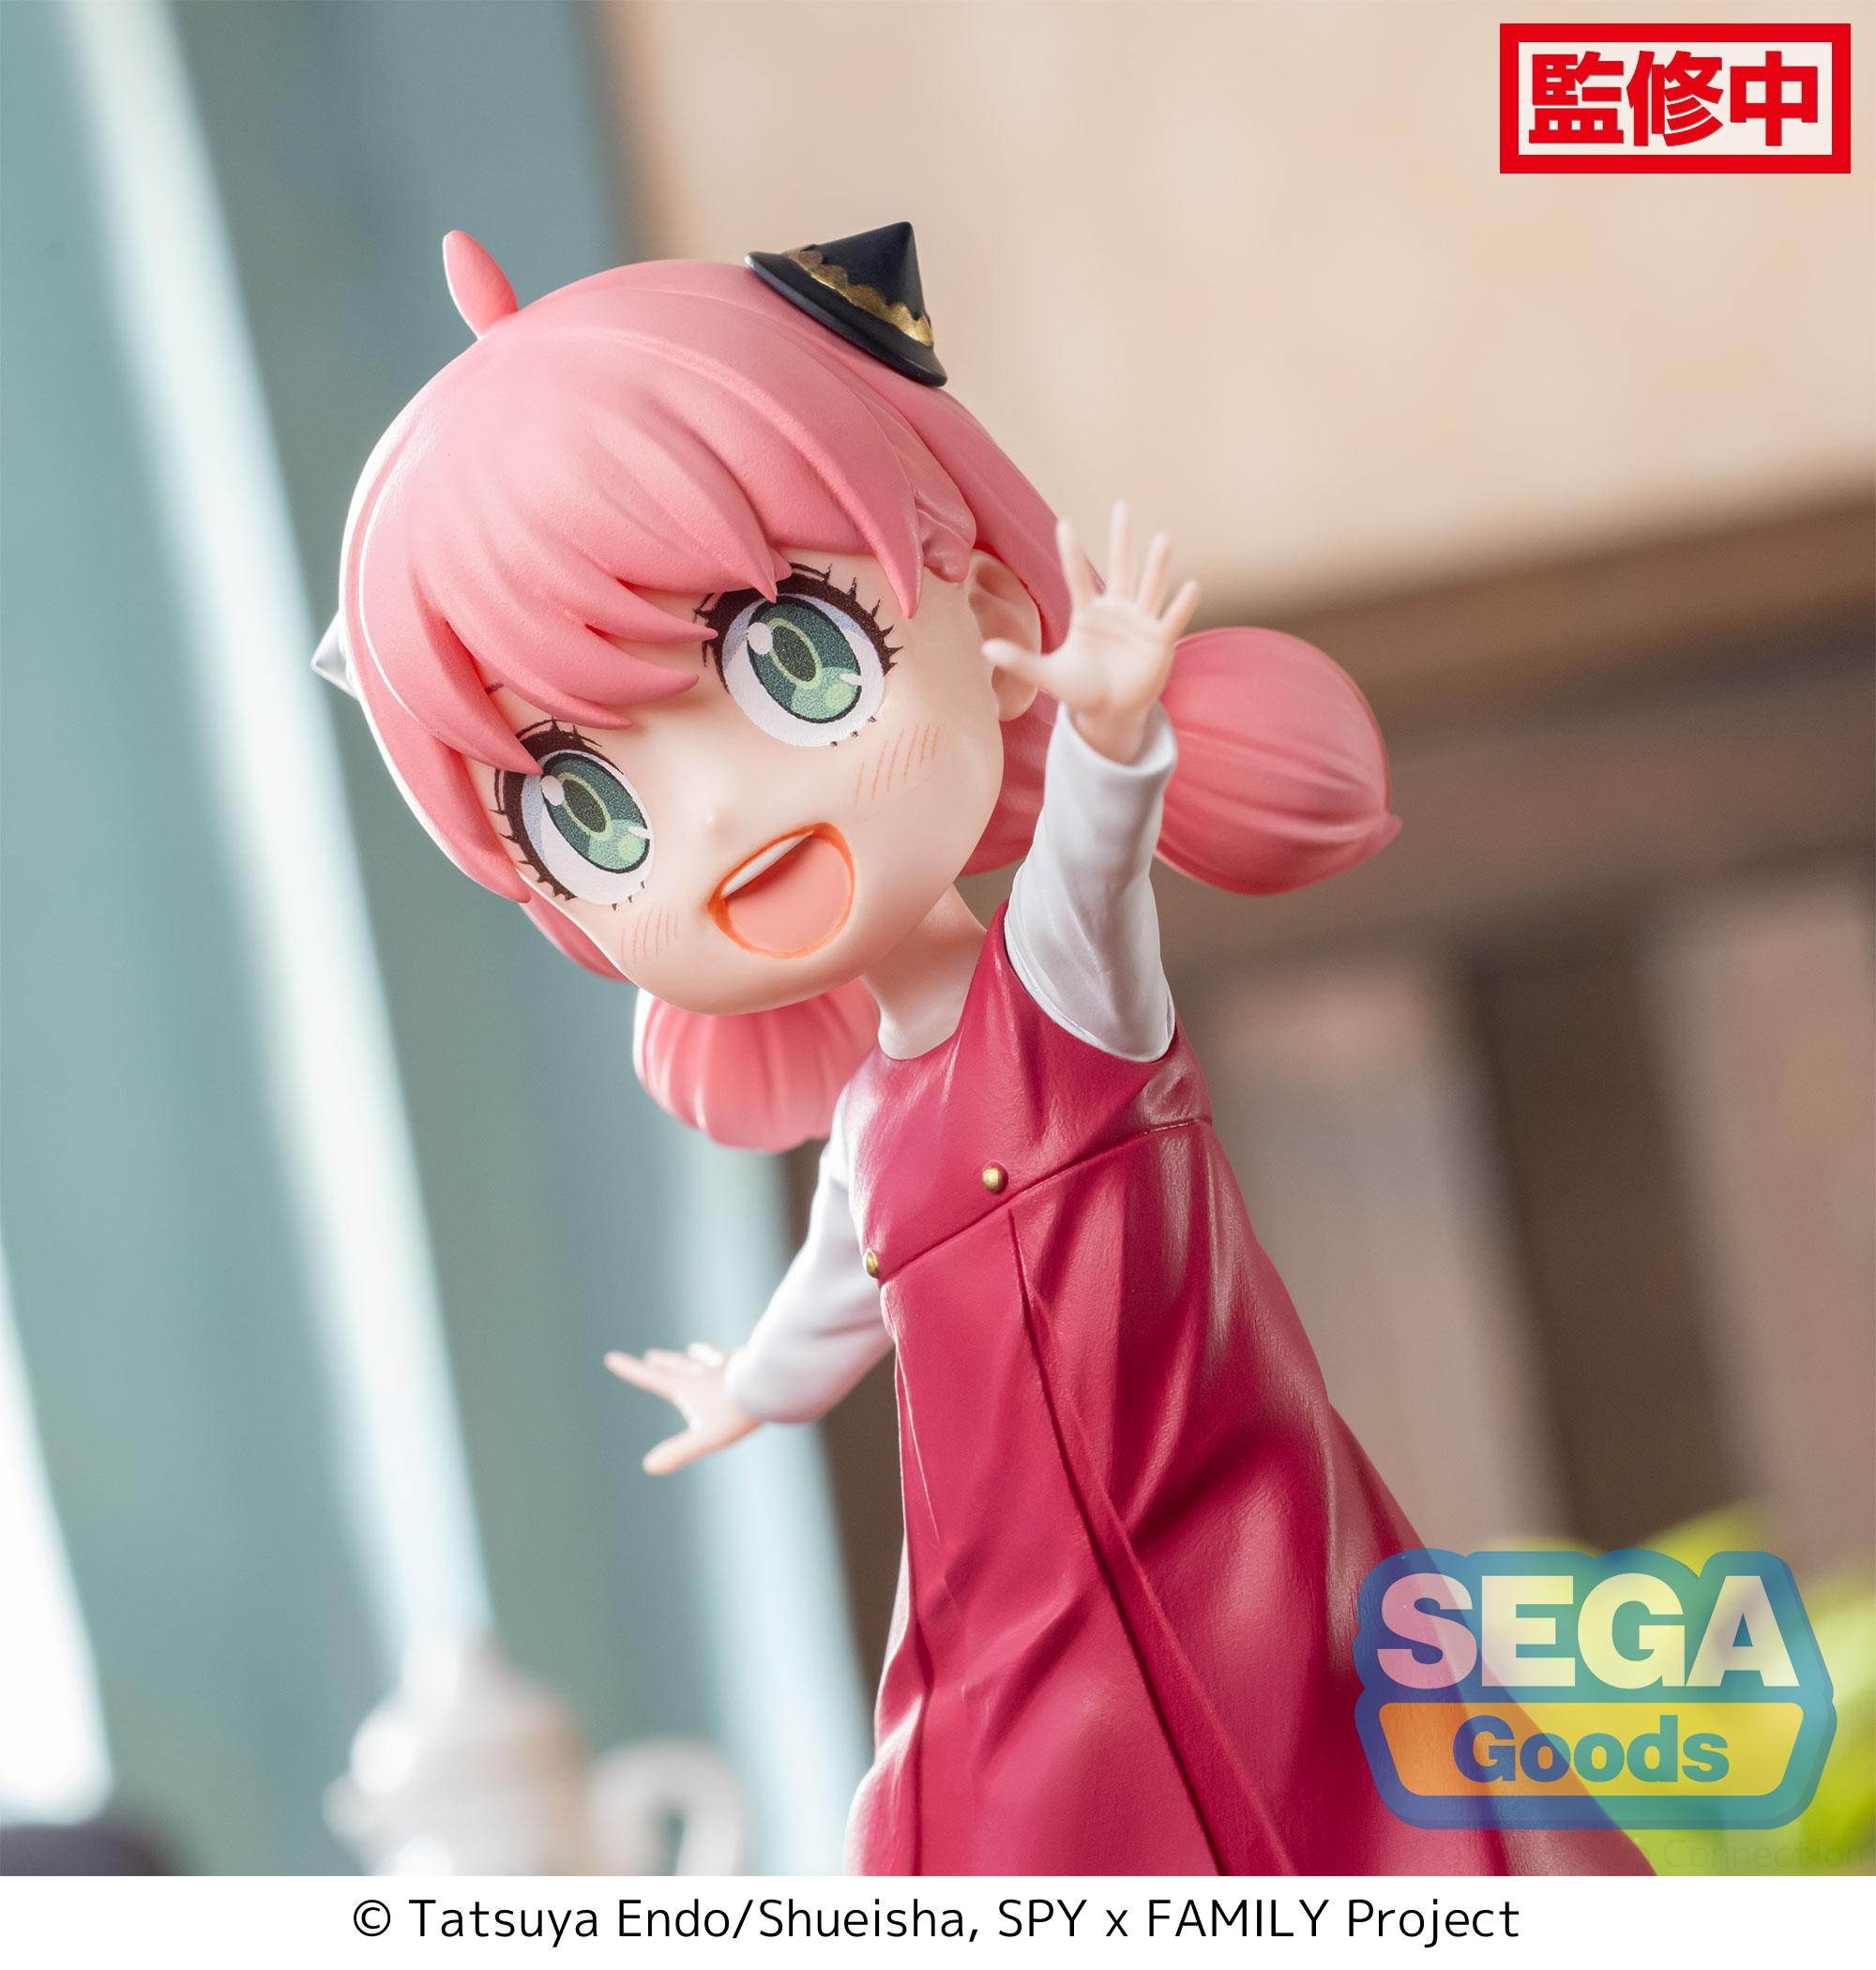 spy-x-family-anya-forger-luminasta-prize-figure-season-1-cours-2-ed-coordination-ver image count 2